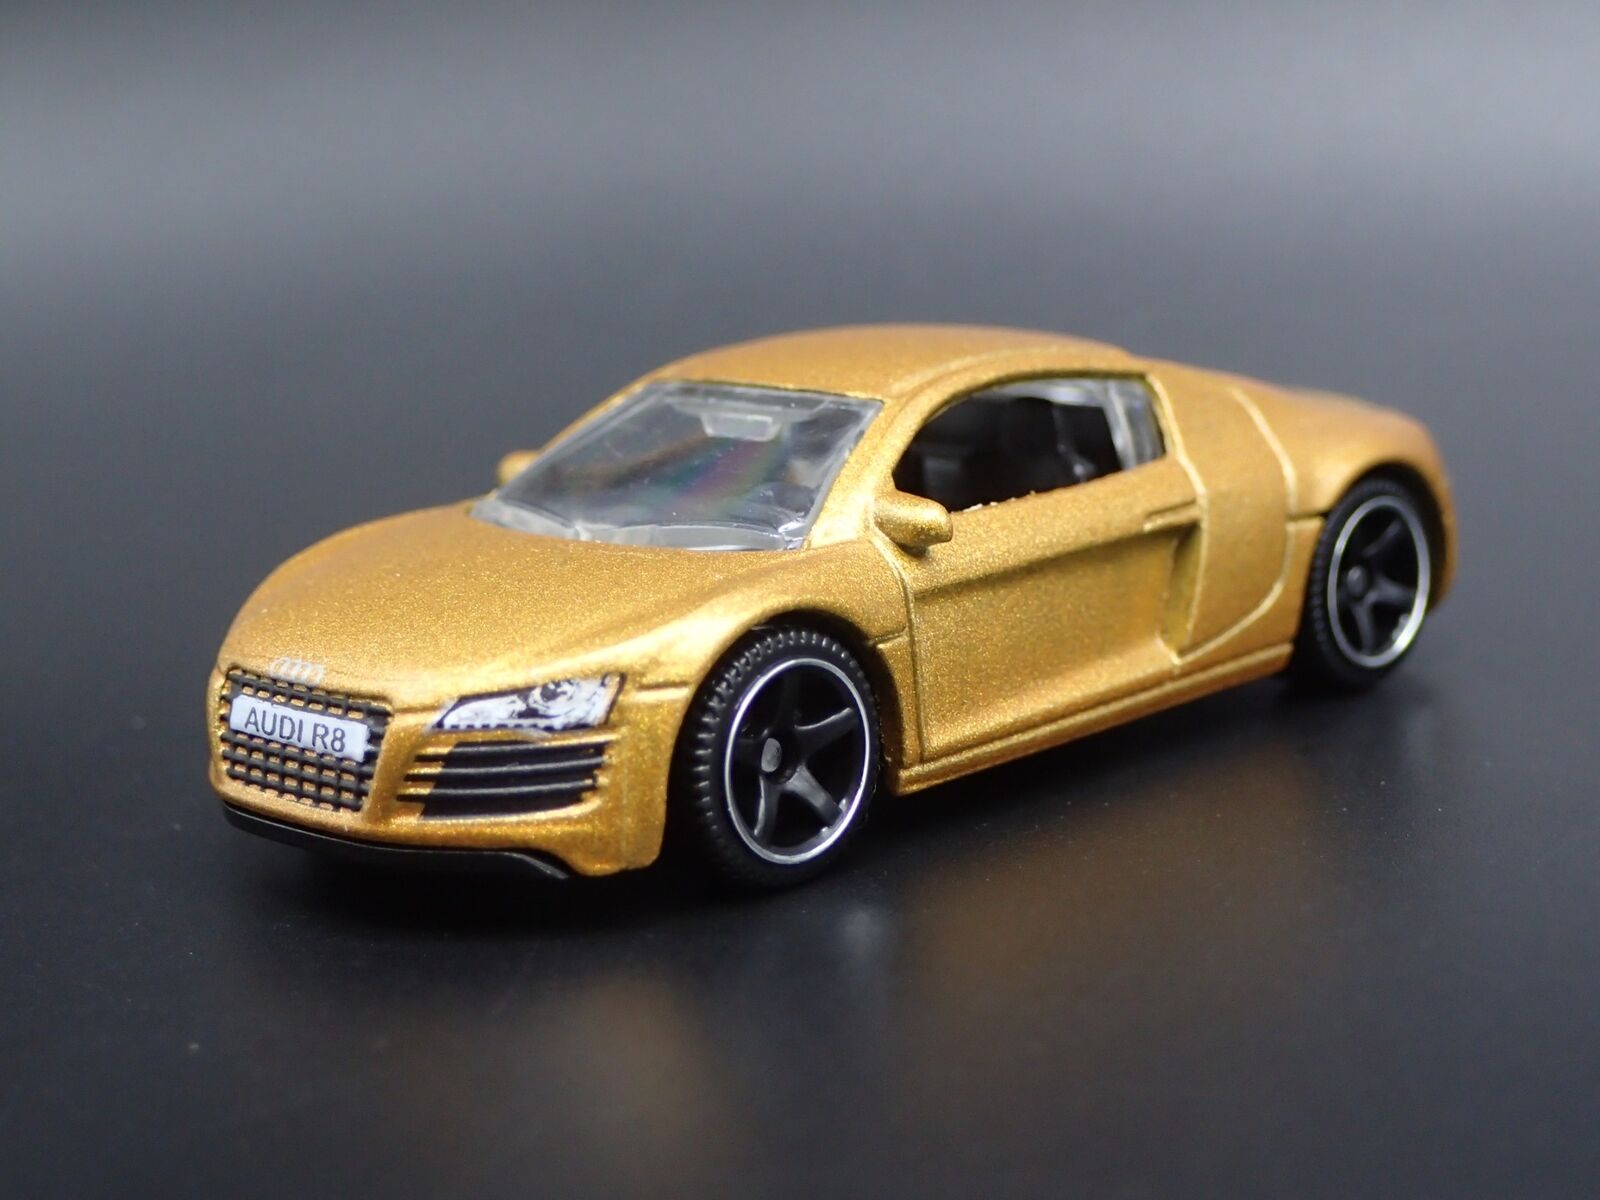 2006-2015 AUDI R8 SUPERCAR RARE 1:64 SCALE COLLECTIBLE DIORAMA DIECAST relisted